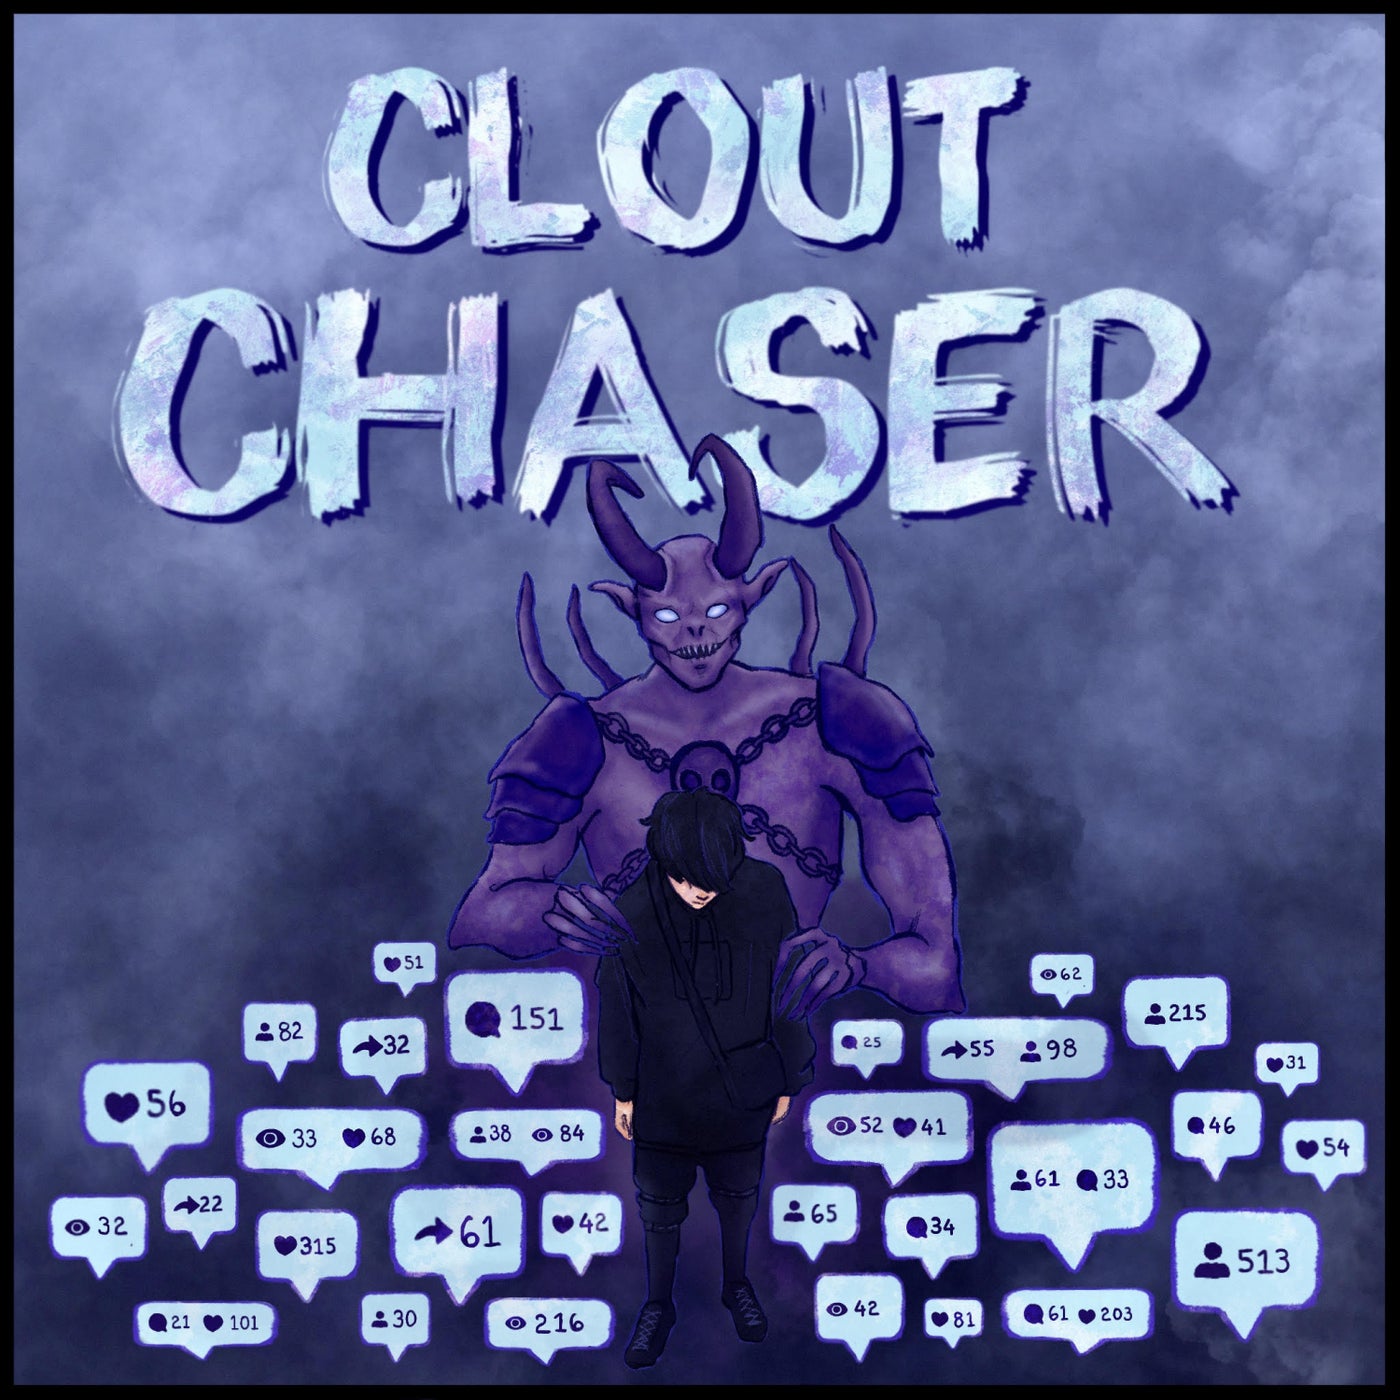 CLOUT CHASER